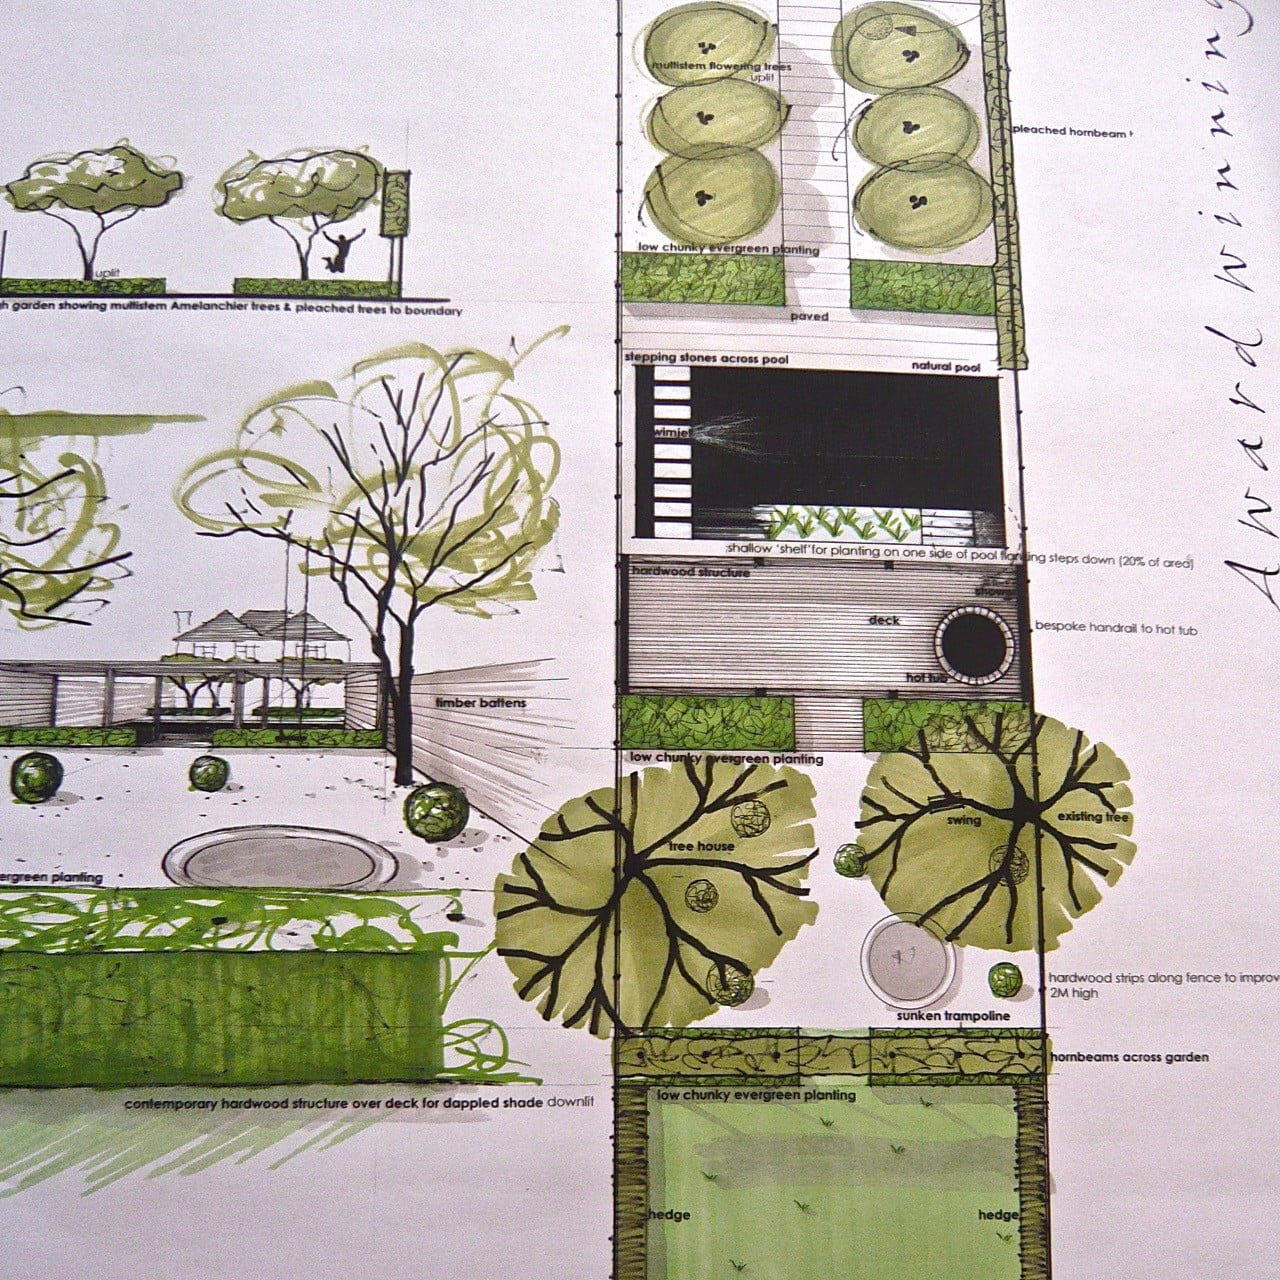 This is one of my drawings for a contemporary town garden in Wokingham. There is a swimming pool, contemporary hardwood structure for shade & lounging & very simple planting for a minimal appearance